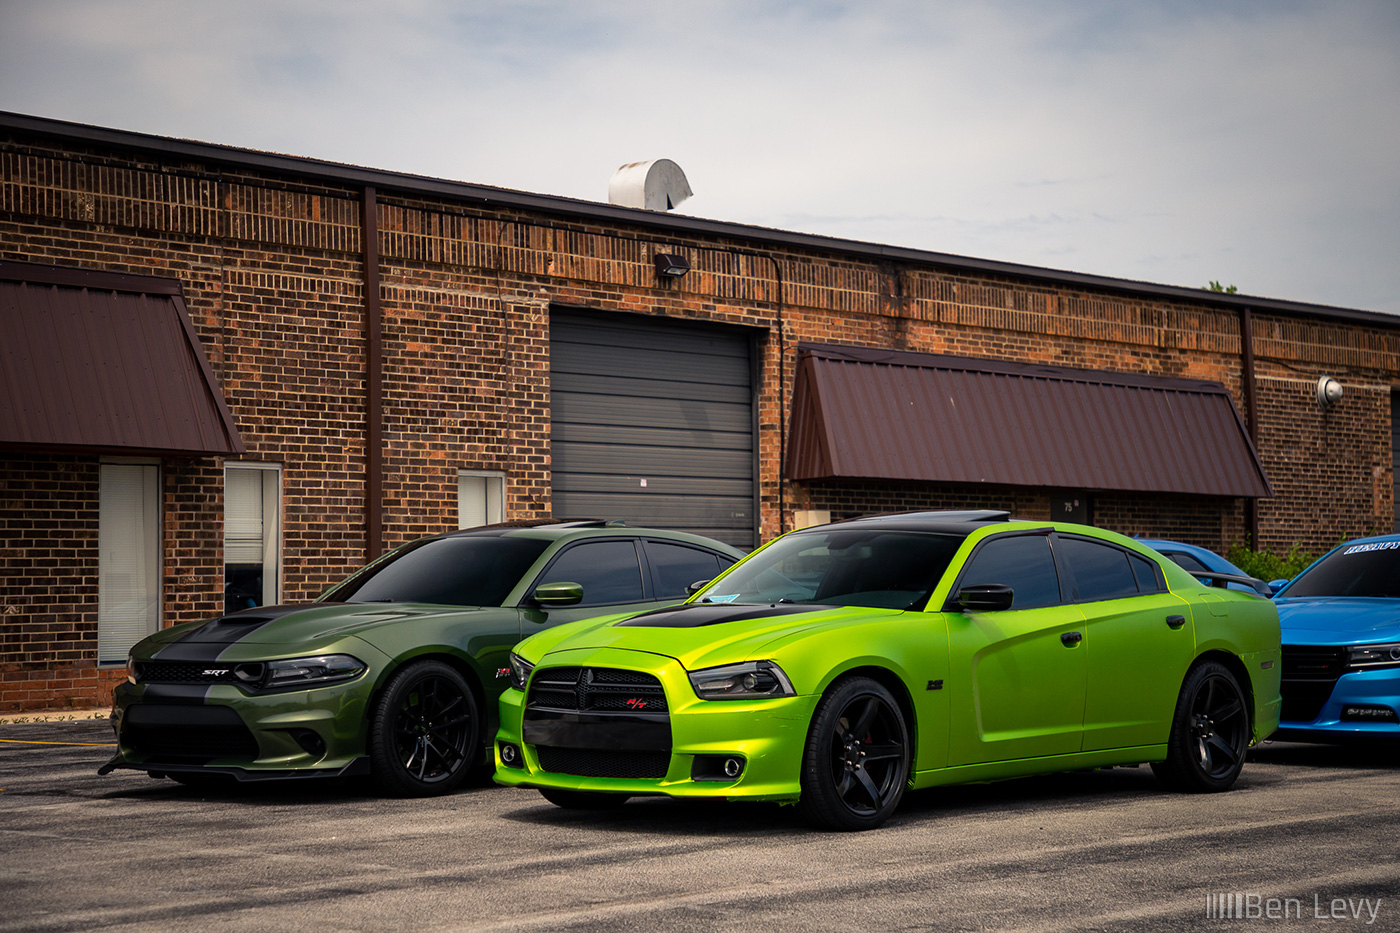 Pair of Green Dodge Chargers